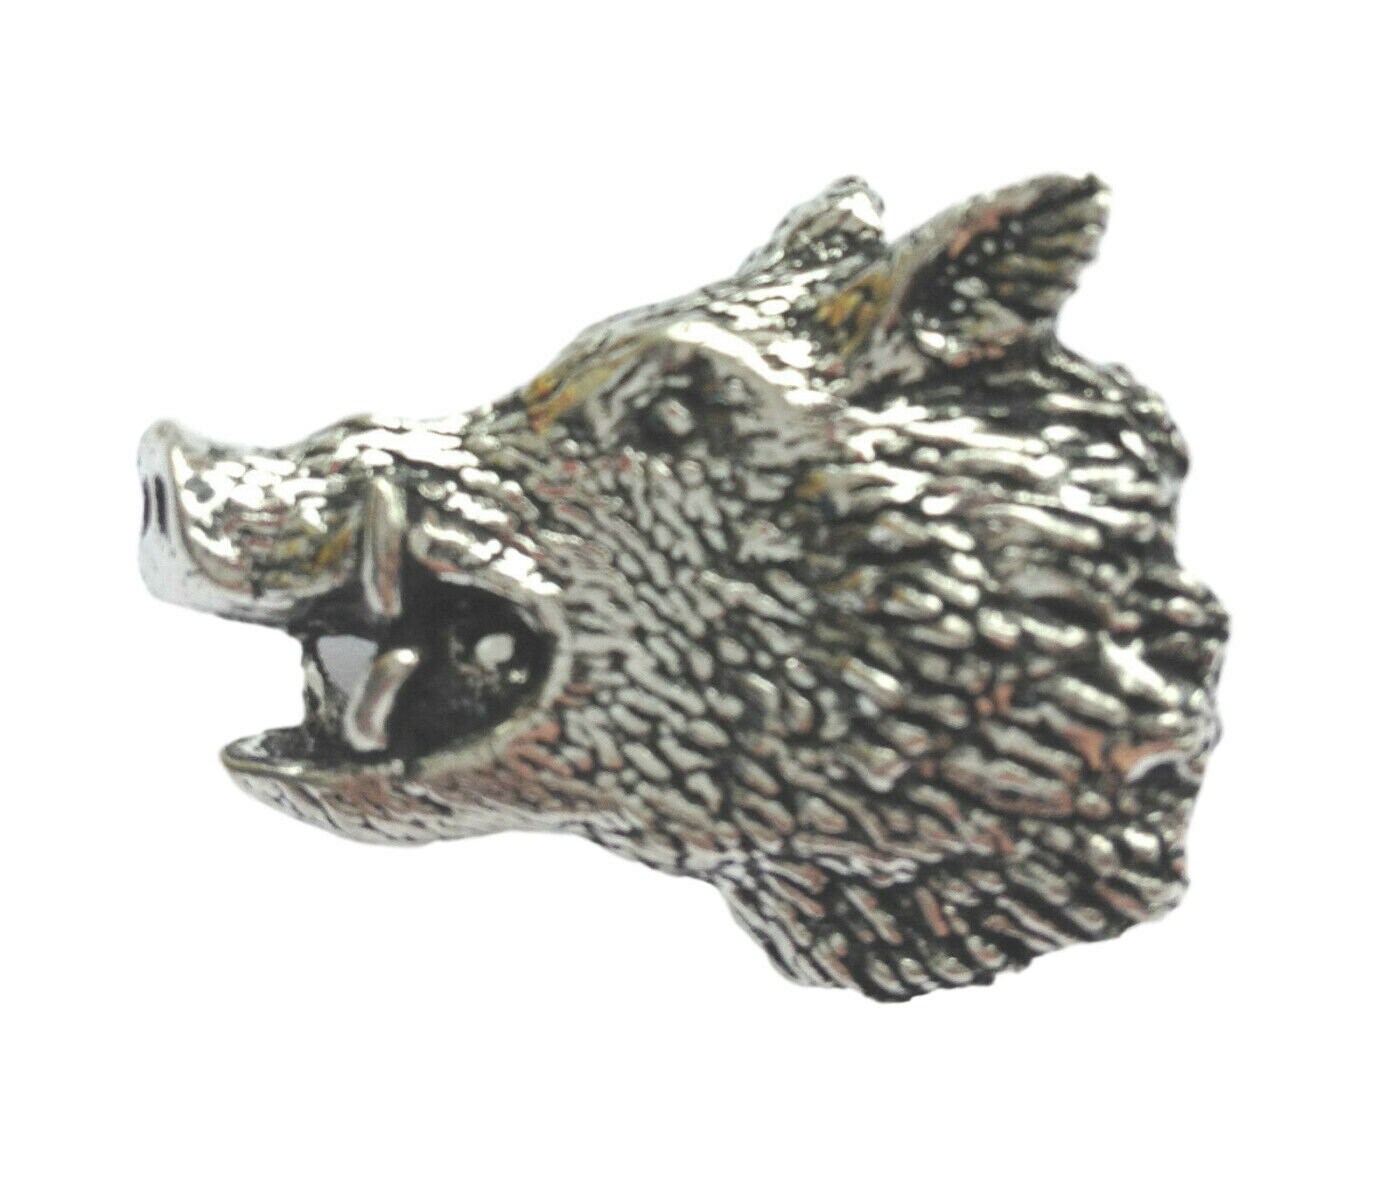 WILD BOARS HEAD Hand Made in Pewter Lapel Pin Badge 